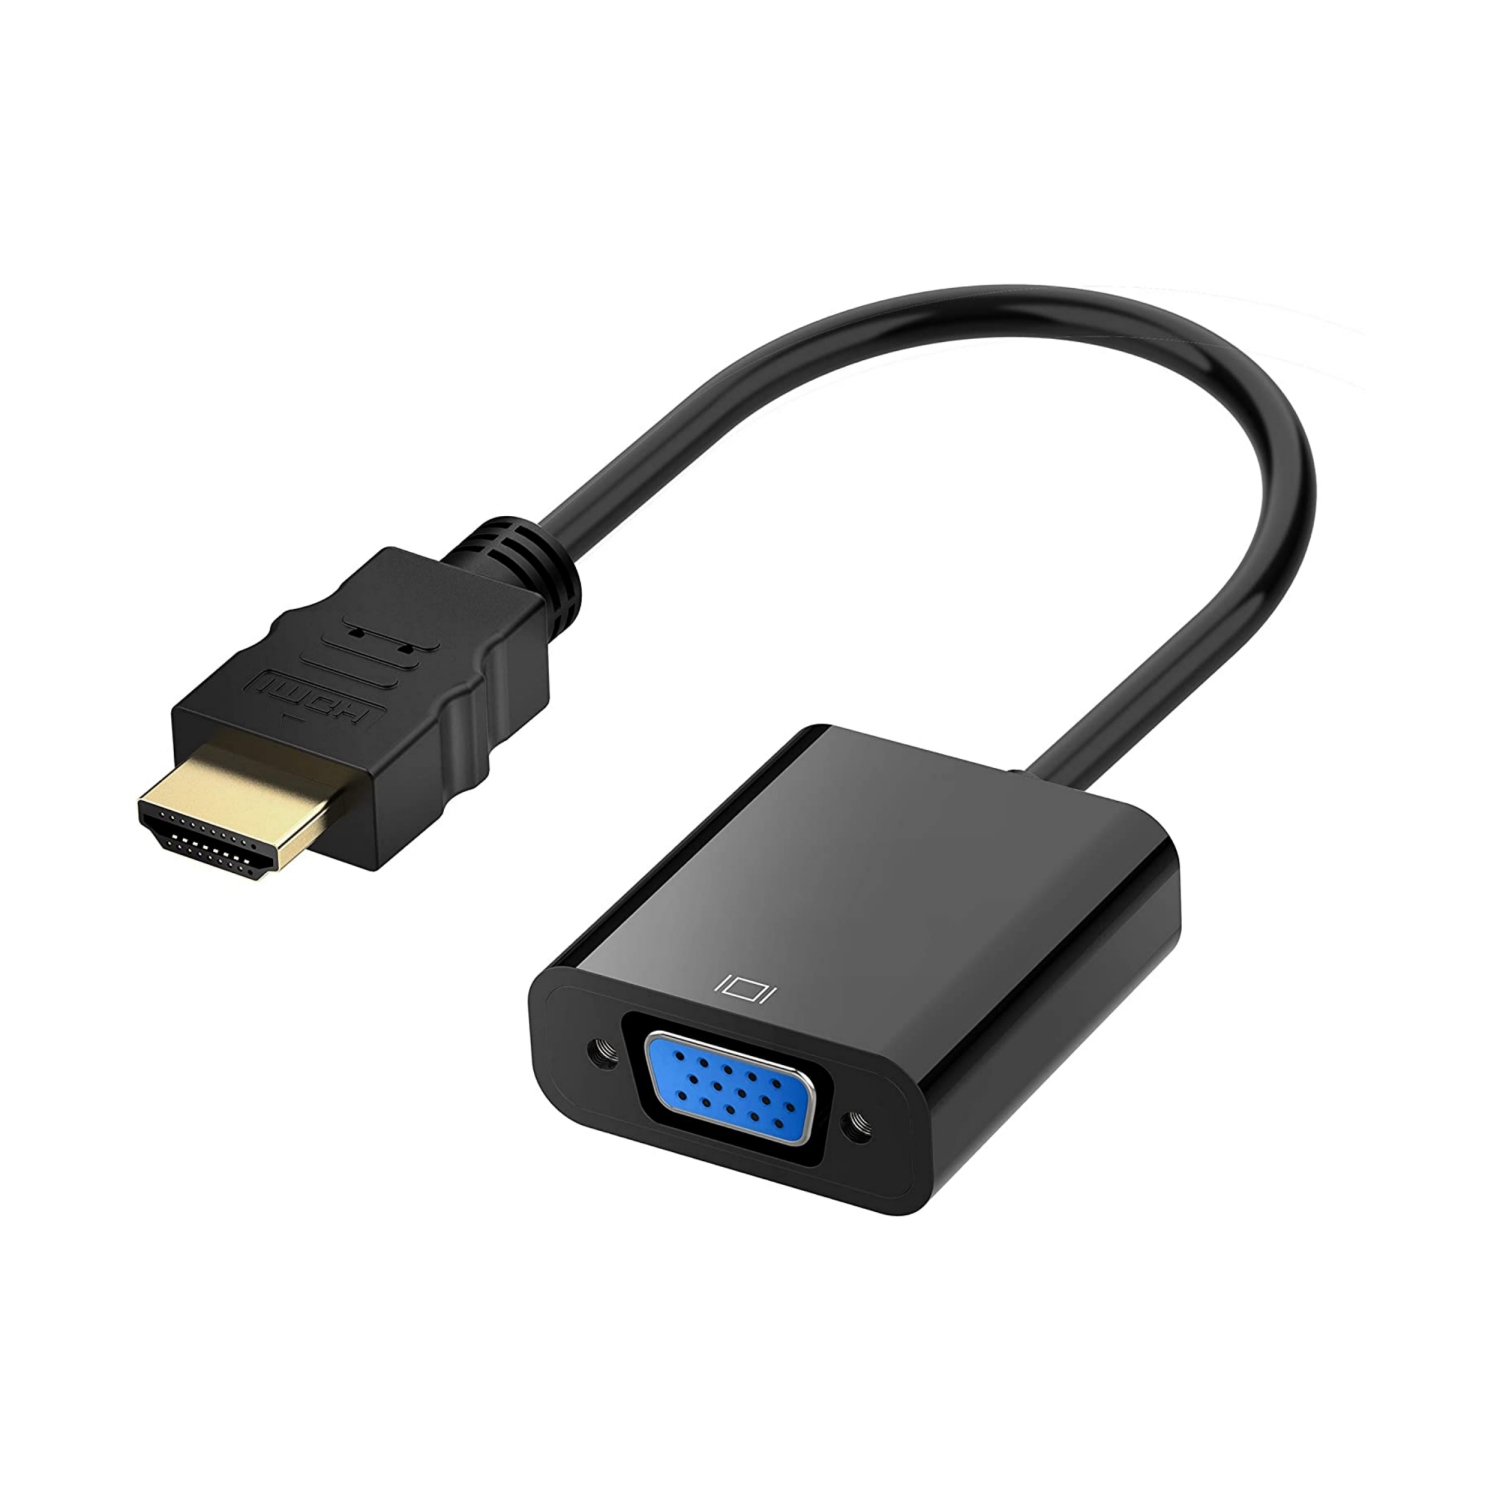 NIERBO Gold-Plated HDMI to VGA Adapter (Male to Female) for Computer, Desktop, Laptop, PC, Monitor, Projector, HDTV, Chromebook, Raspberry Pi, Roku, Xbox and More - Black